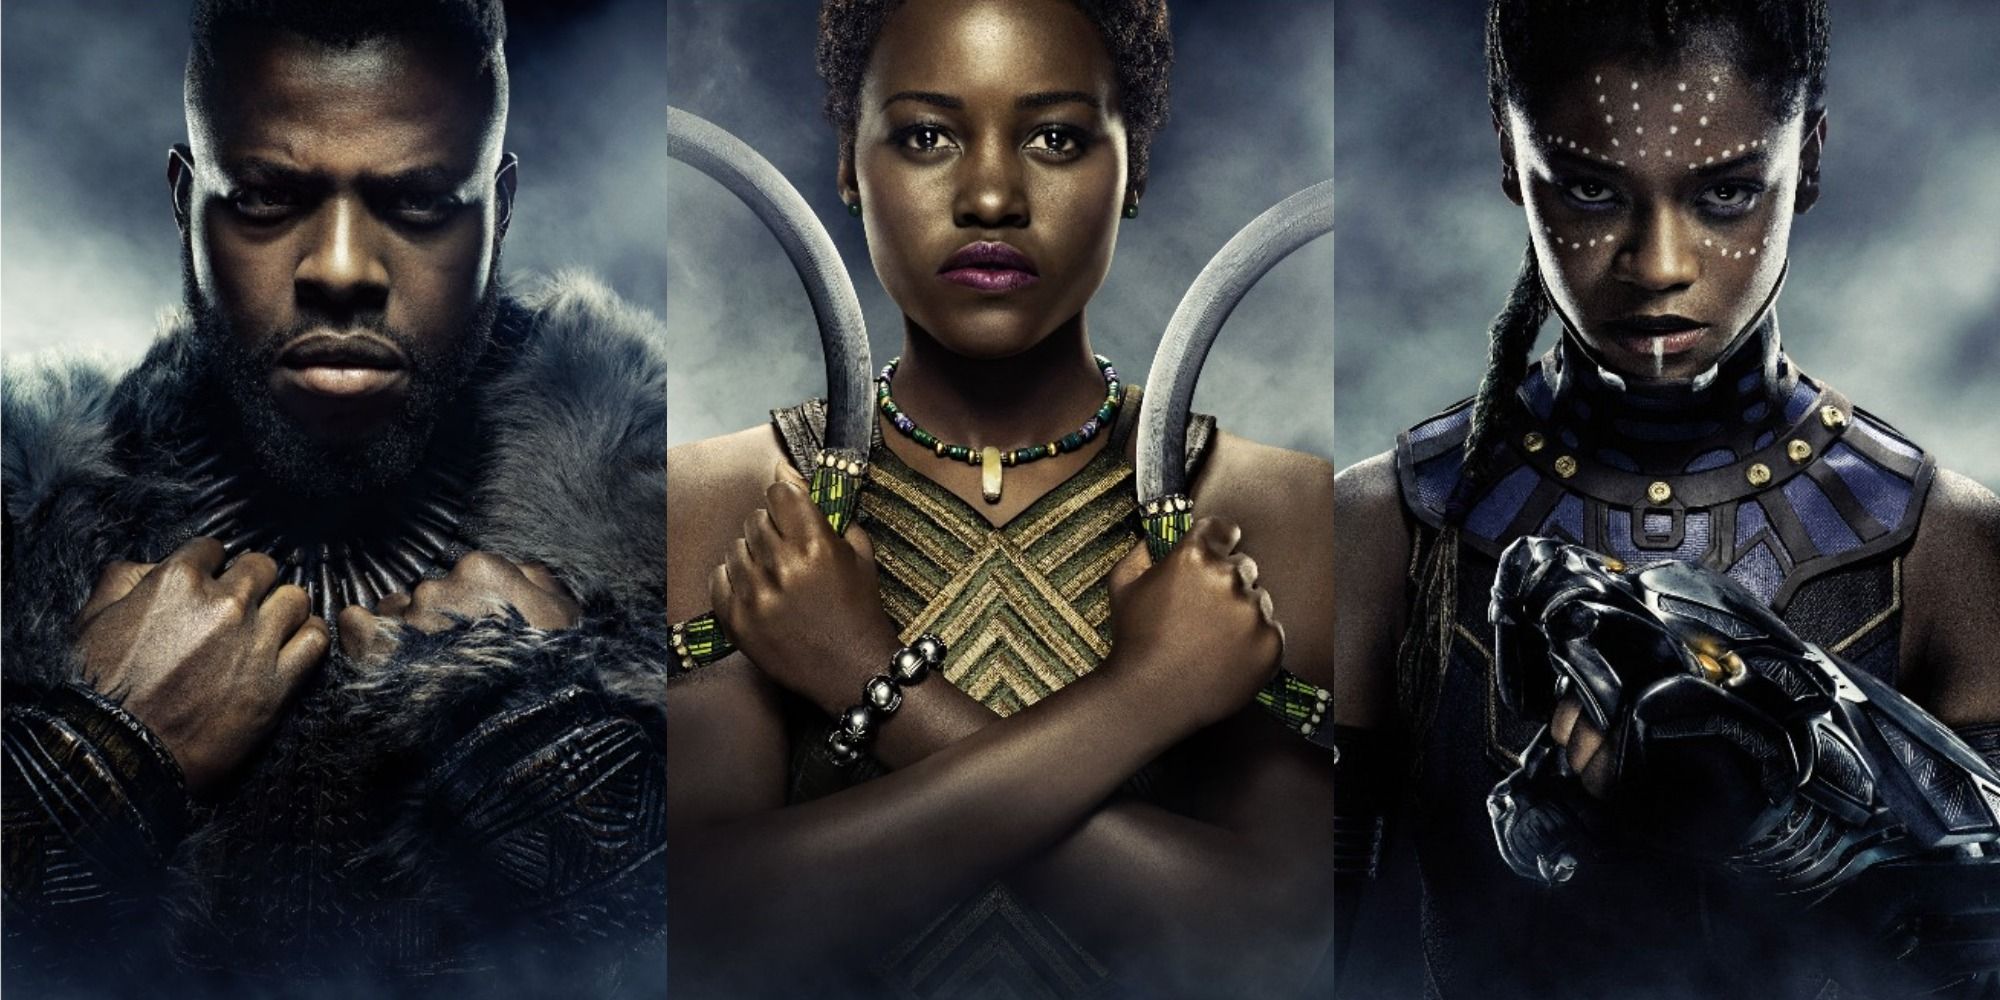 A collage of the character posters for M'Baku, Nakia and Shuri from Black Panther